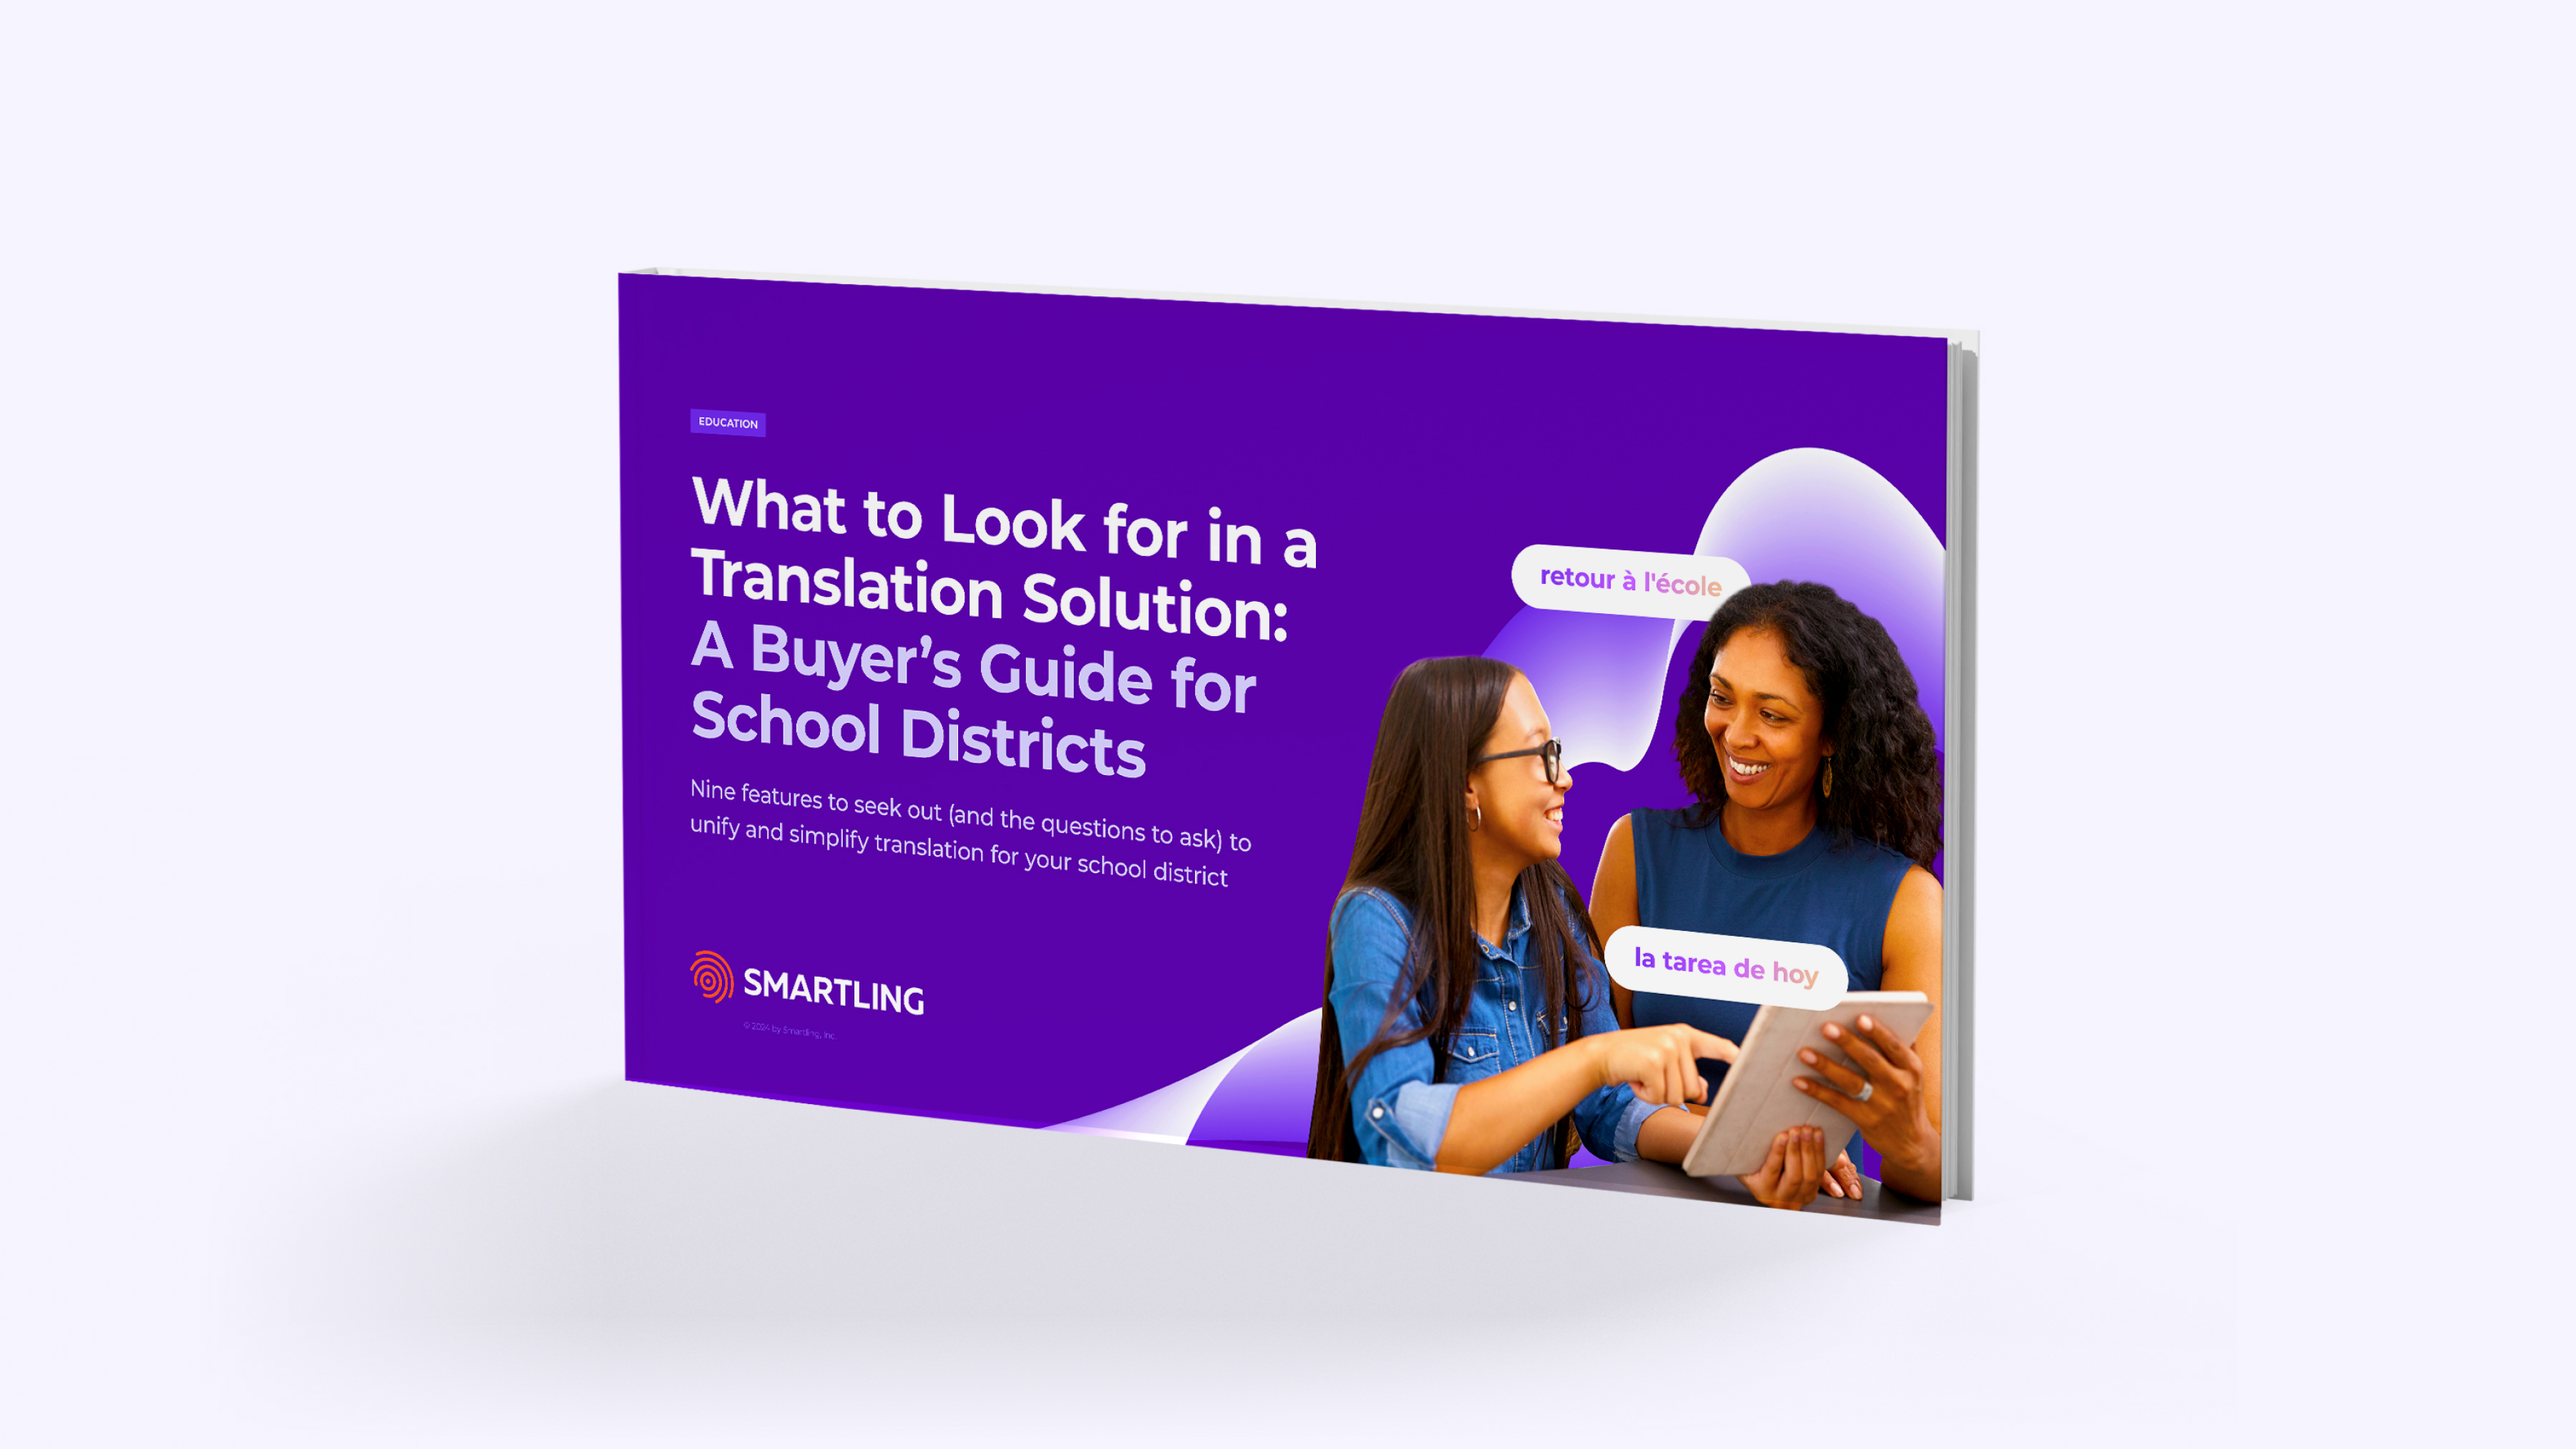 What to Look for in a Translation Solution A Buyer's Guide for School Districts